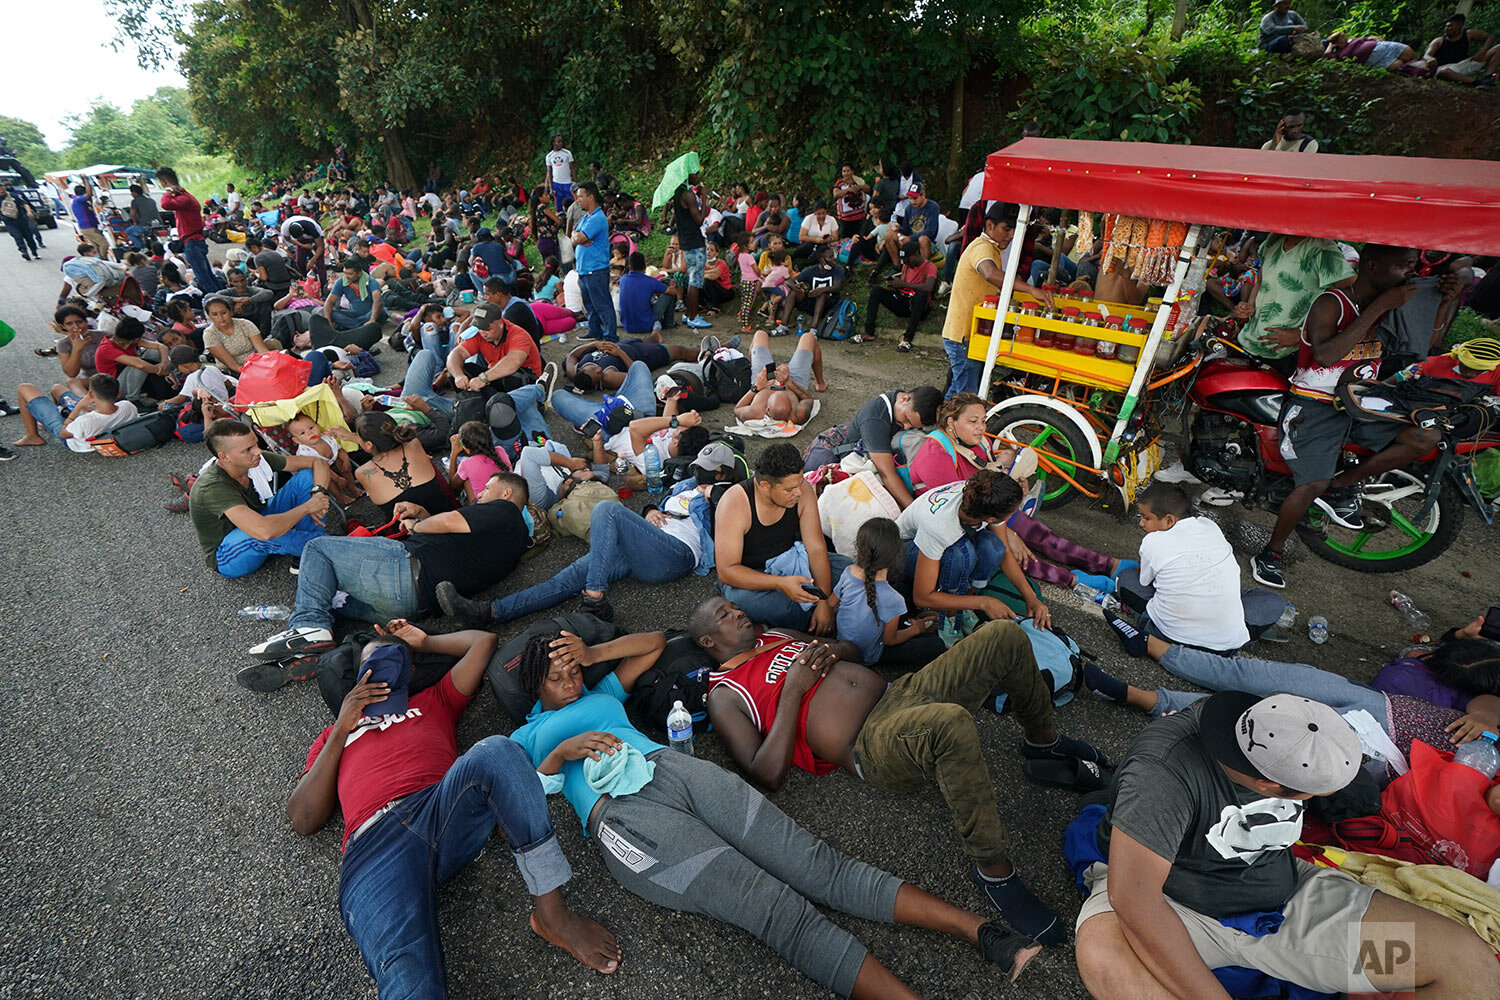  Migrants heading north to the U.S. rest along the Huehuetan highway in Chiapas state, Mexico, Sept. 4, 2021. (AP Photo/Marco Ugarte) 